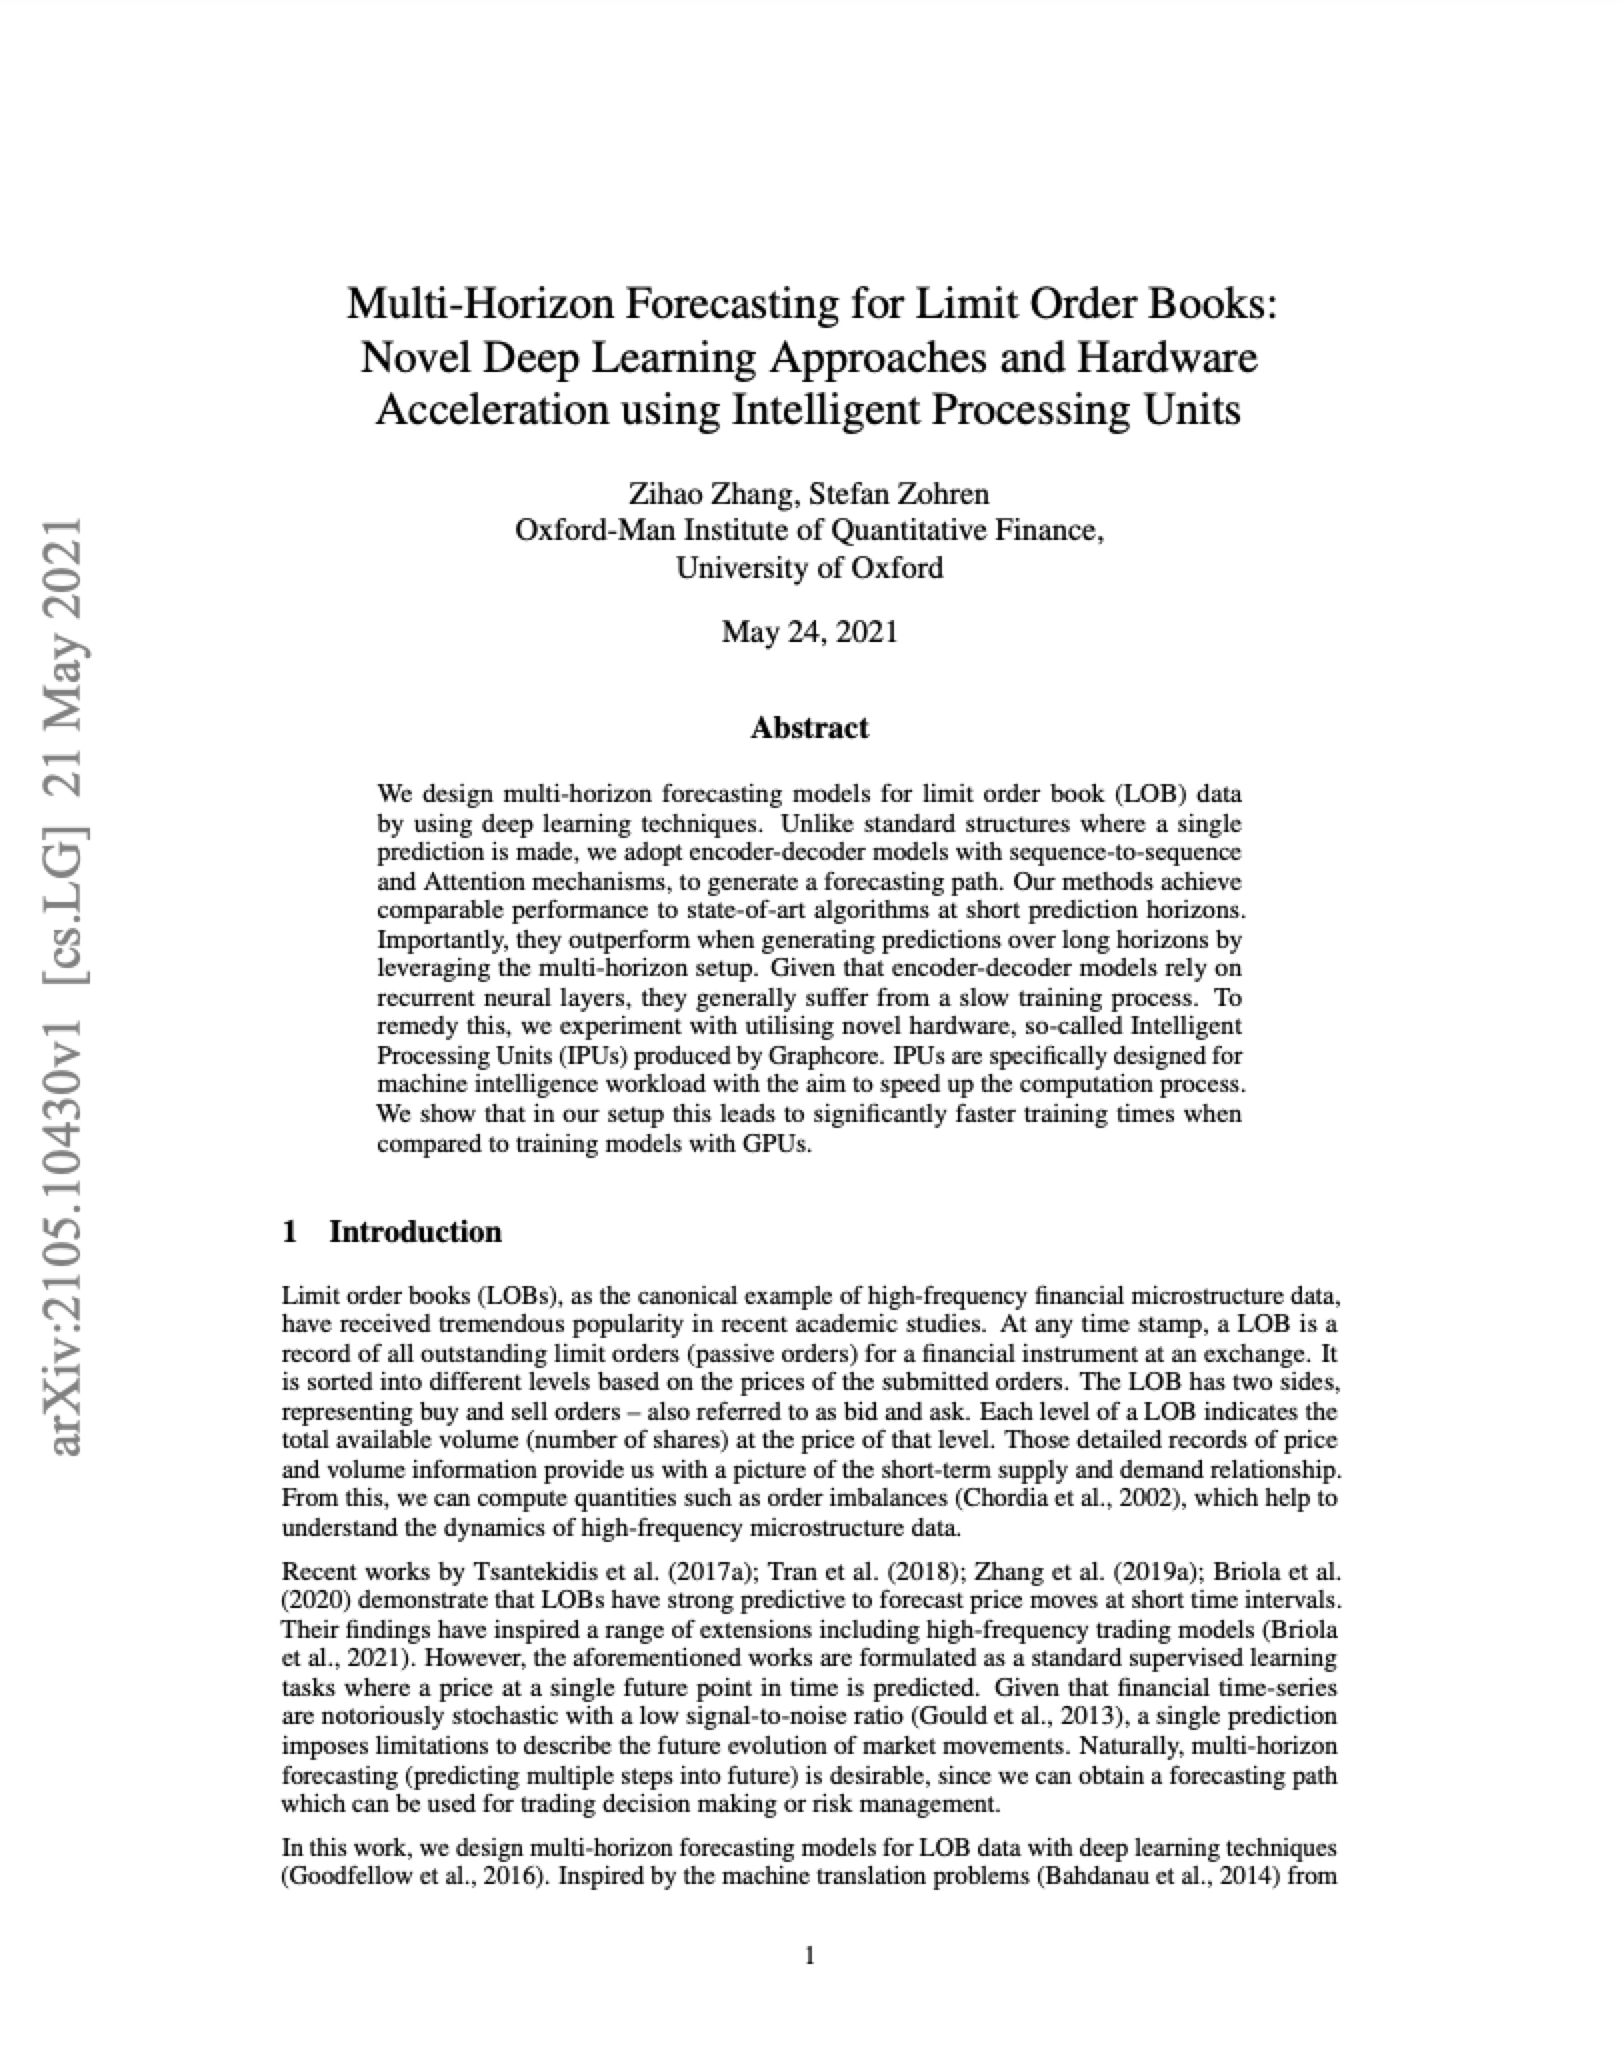 Oxford-Man Institute & University of Oxford: Multi-Horizon Forecasting for Limit Order Books: Novel Deep Learning Approaches and Hardware Acceleration using Intelligent Processing Units